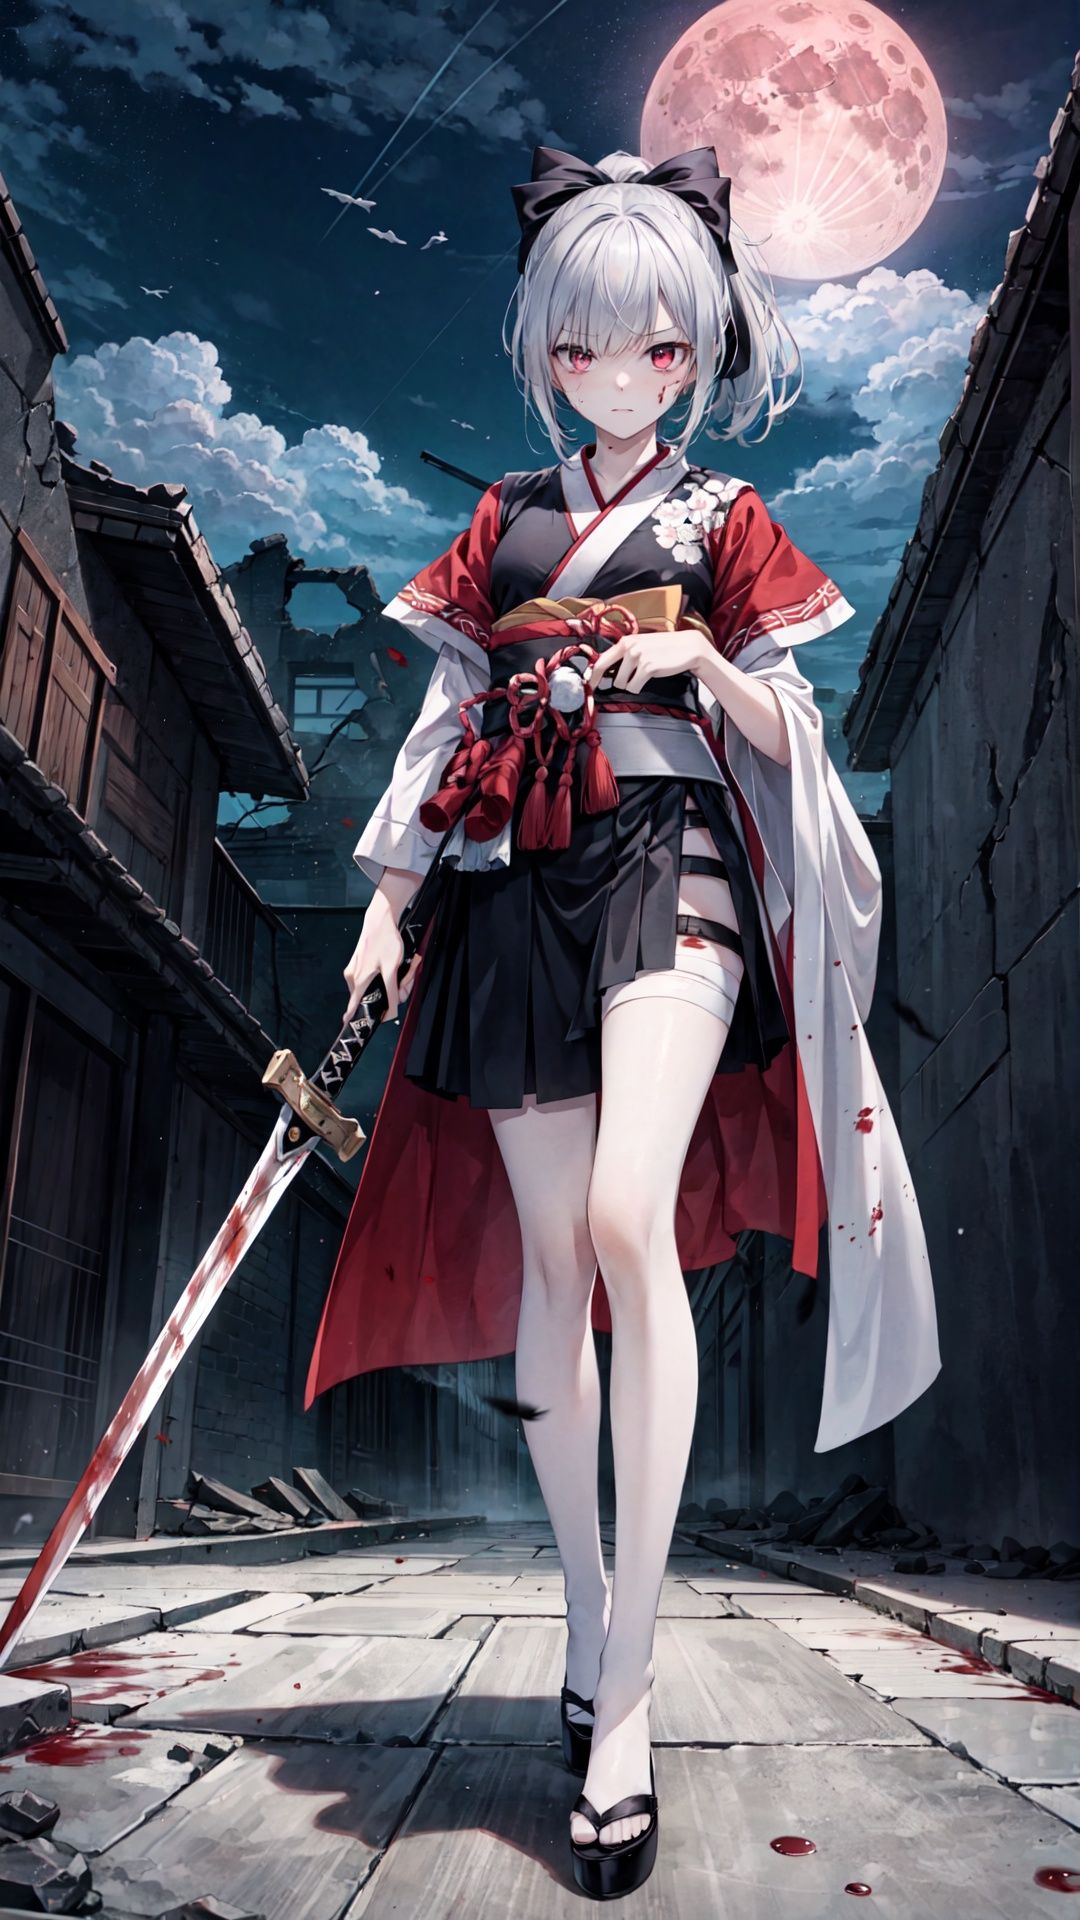  highres, extremely high quality,detailed eyes,{{{detailed face}}},detailed background,game cg, intense shadow,{{{detailed sword}}}

masterpiece,{{solo}},a female,silver hair, high ponytail, hair ribbon, serious,walking towards the front, holding a long Samurai sword in one hand,{{{bandage wrap breasts}}},middle breasts,blood on sword,silk {{expose breasts}} samurai uniform,{{black high heels}}, red gradient eyes,hair cover one eye,{{black tattoo on the left leg}},few blood on face,few blood on body

{{{night}}},an extremely huge {{blood moon}} hanging on the sky,(ruins:1.3),ruins of buildings,(blood is flowing over the ground),(wholesale slaughter),{{black crows flying in the sky}},{{explosion}},{{{few small black feathers floating in the sky}}}
